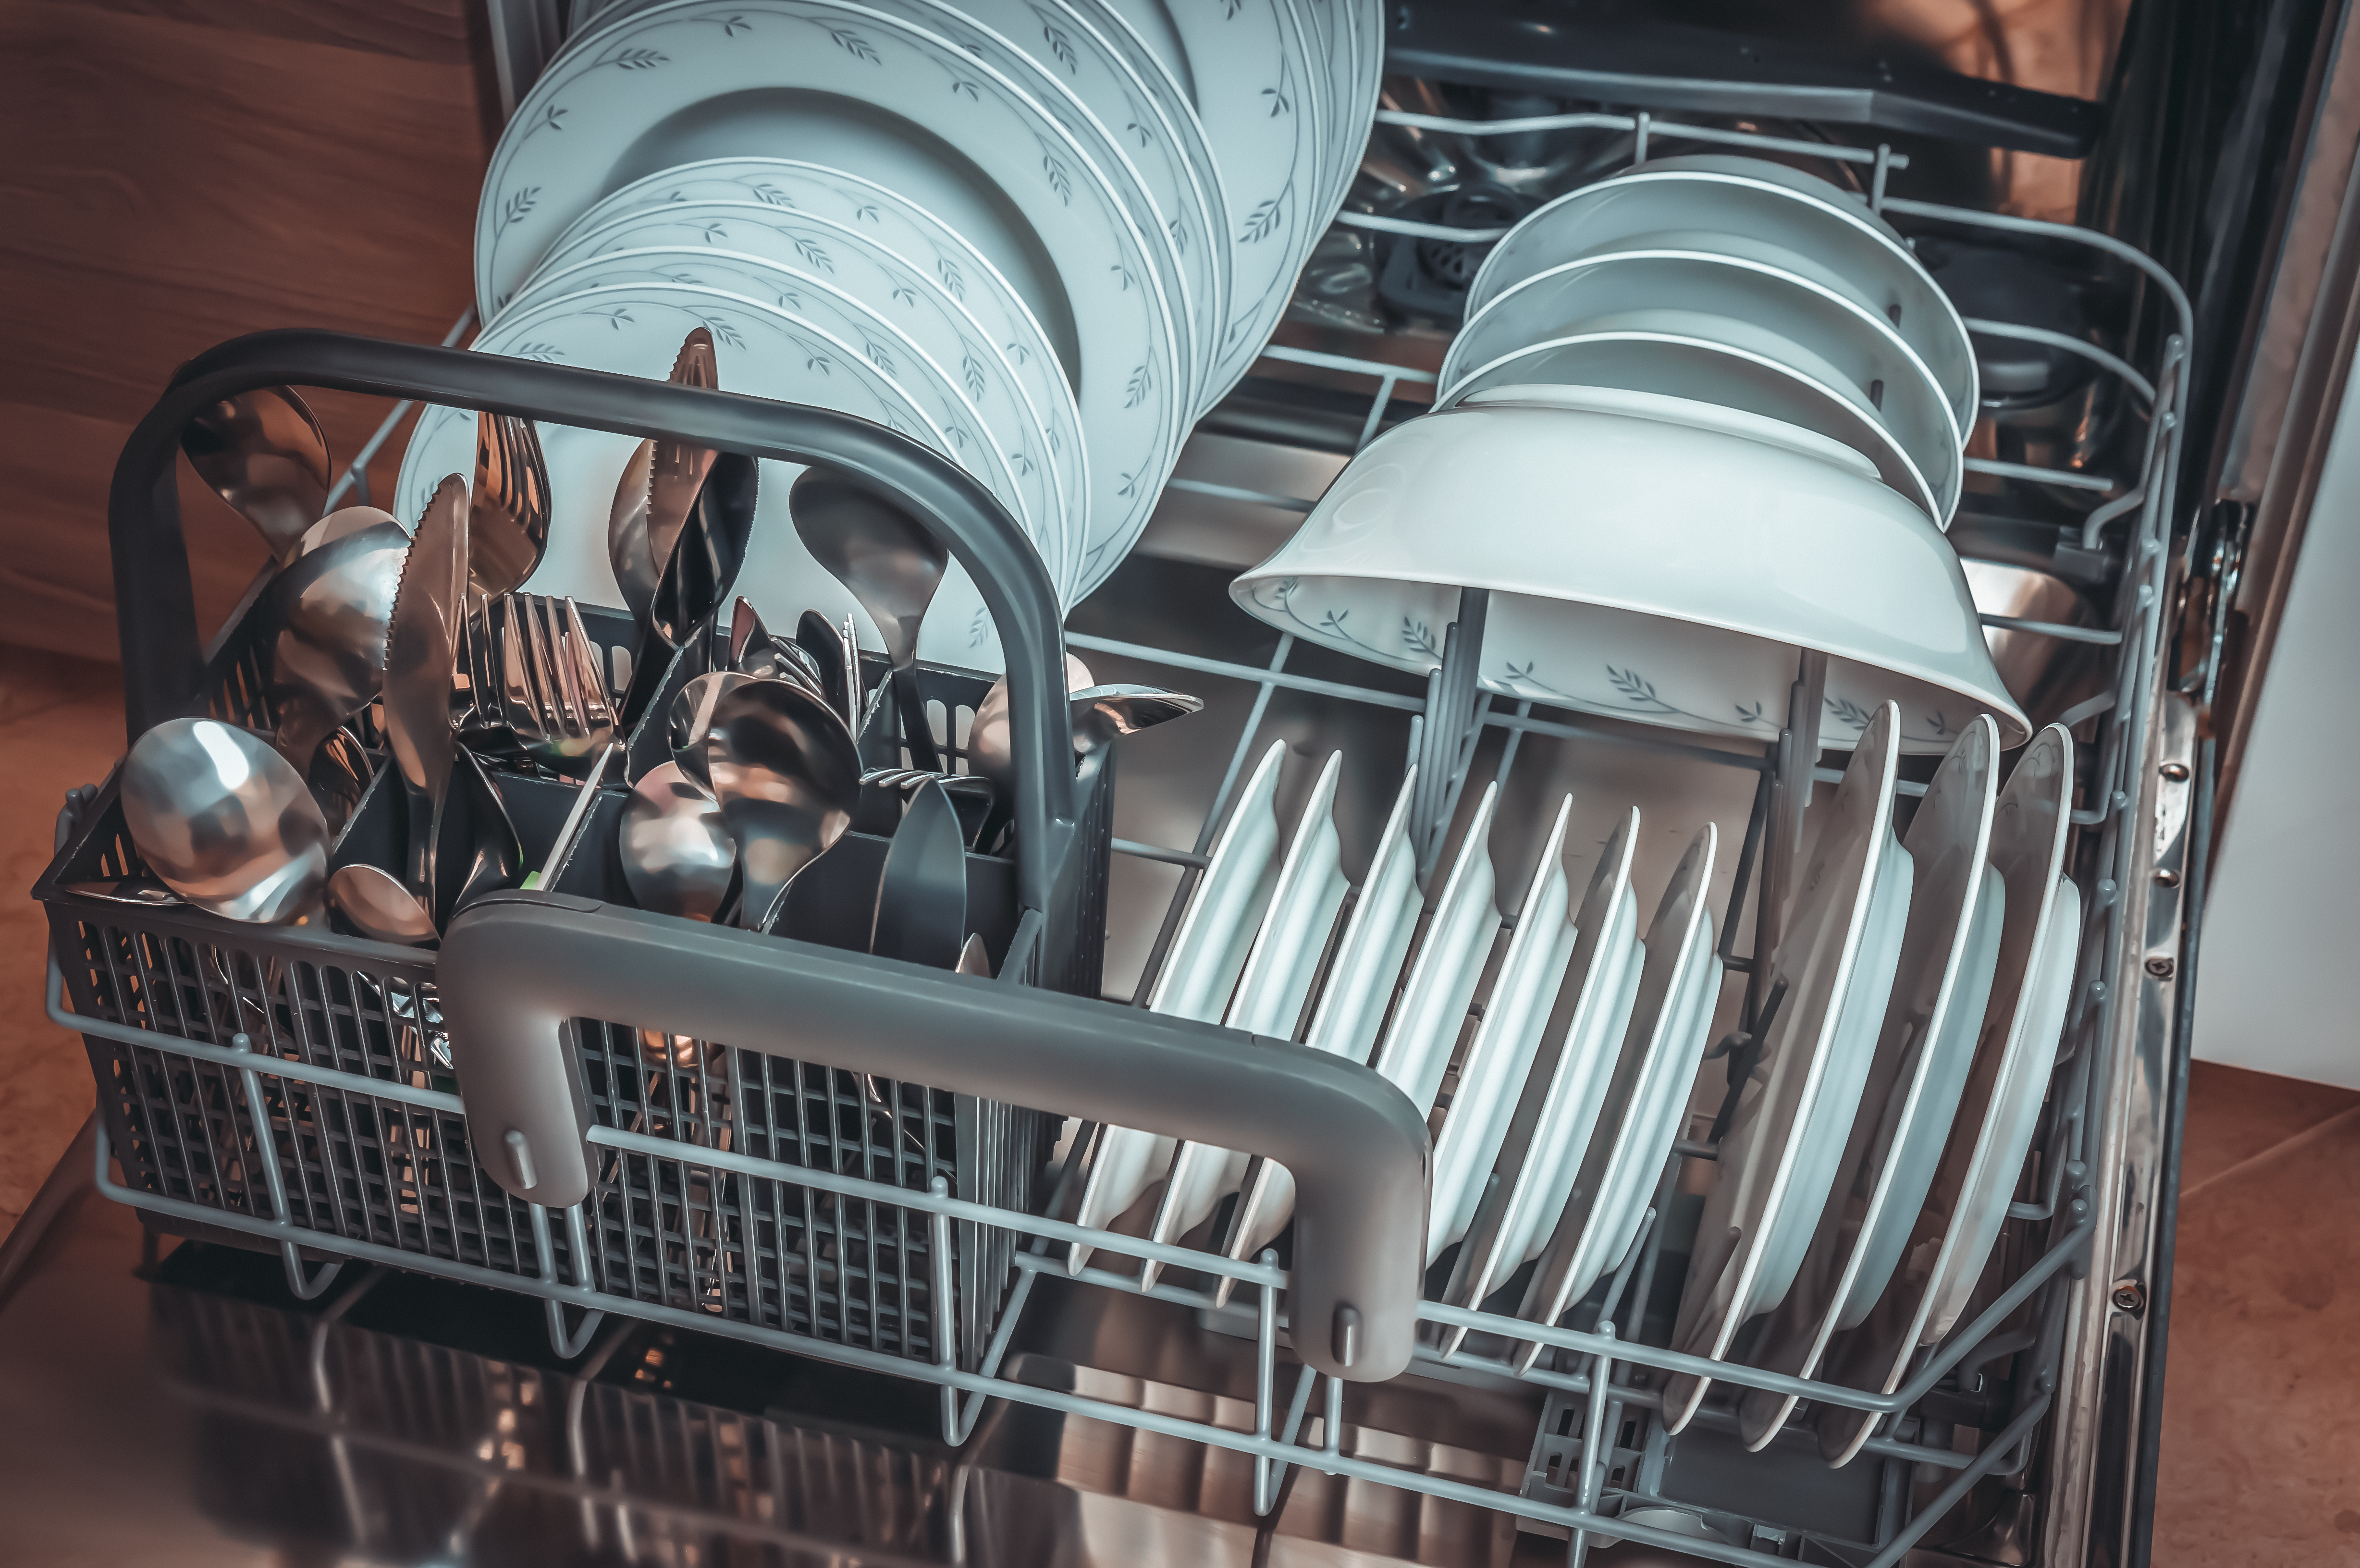 How to Save Energy when Using Your Dishwasher